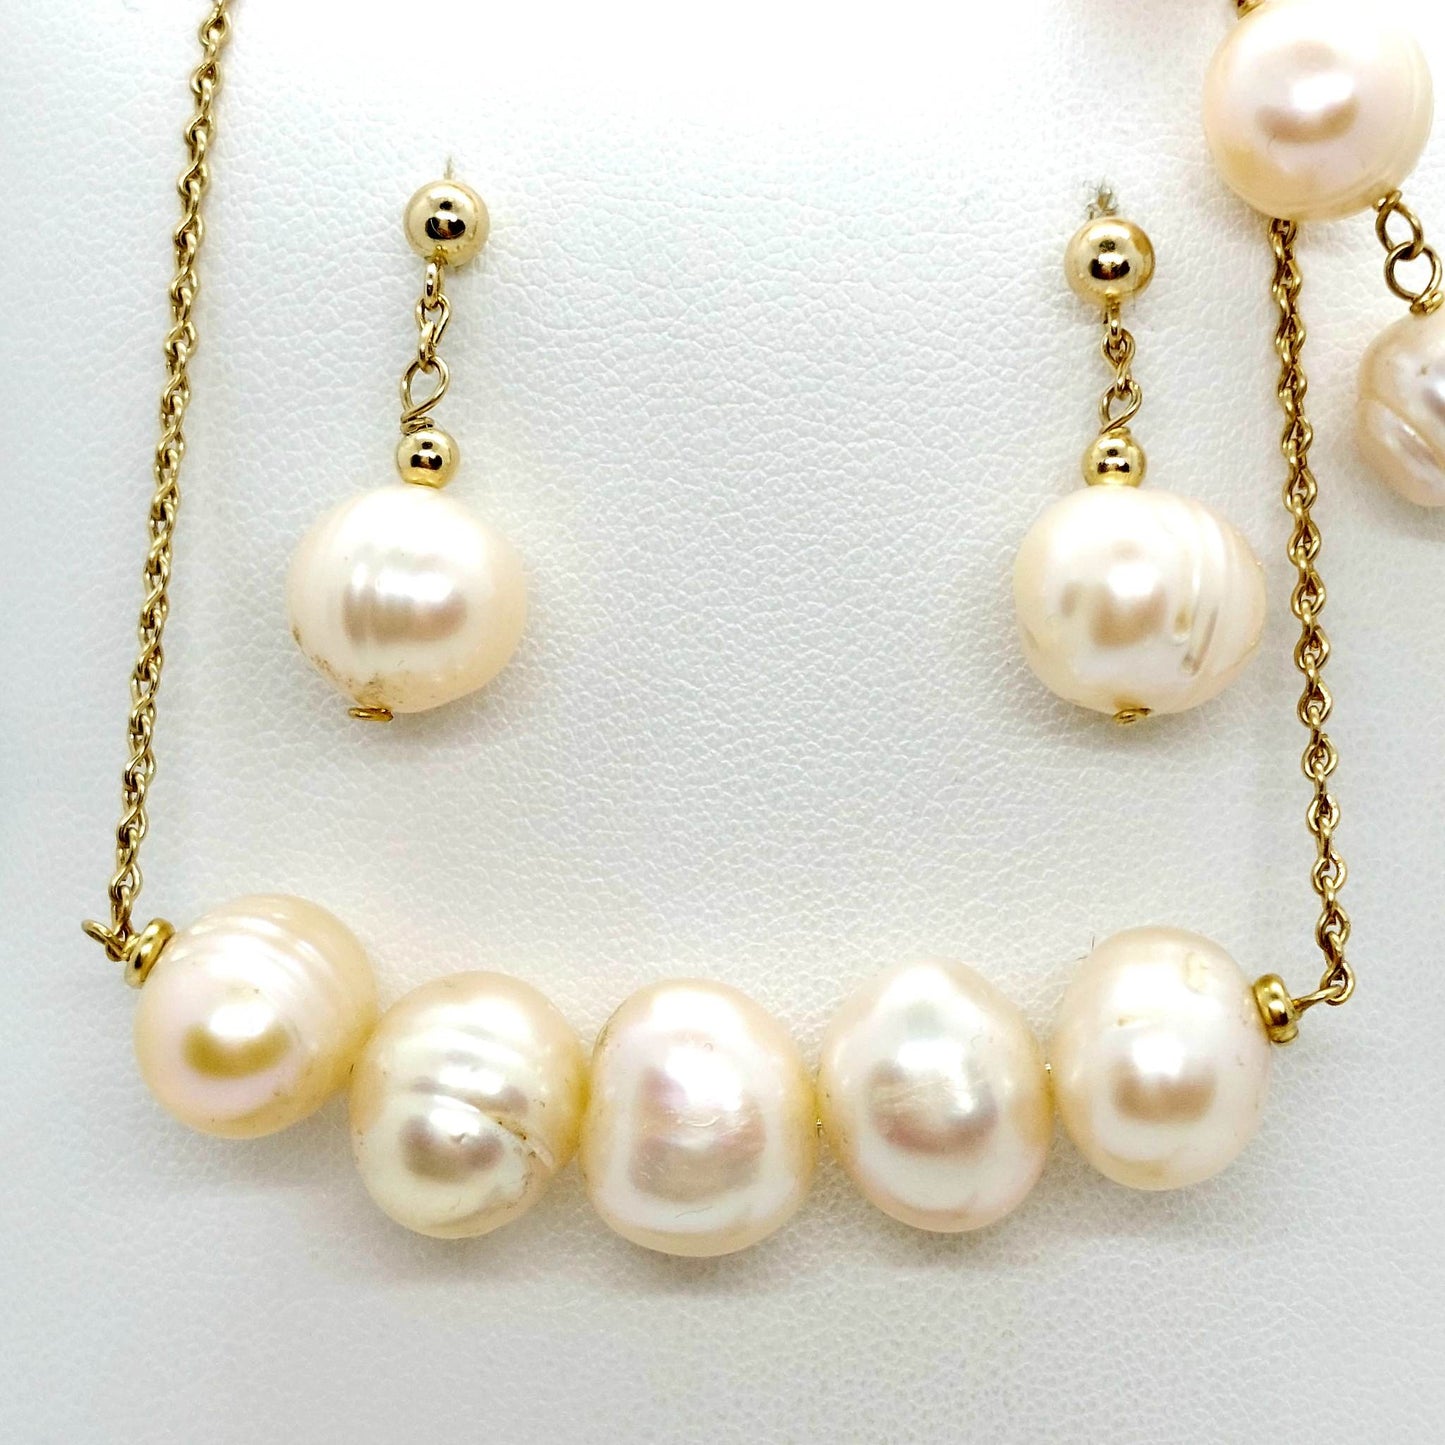 Natural Peach Pearl Jewelry Set - Solid 10K Gold